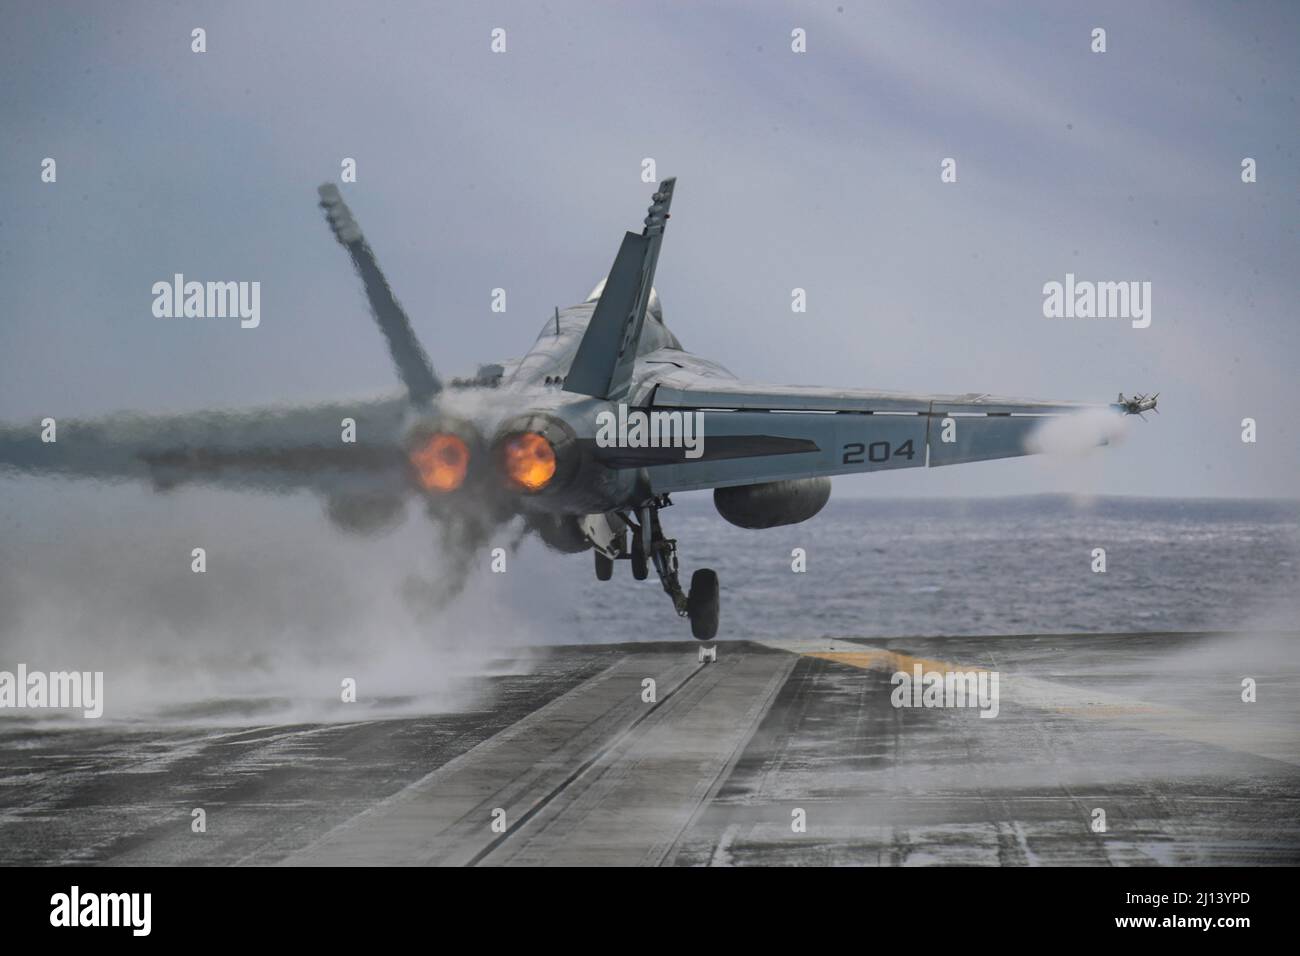 Philippine Sea, United States. 20 March, 2022. A U.S. Navy F/A-18E Super Hornet fighter jet, assigned to the Tophatters of Strike Fighter Squadron 14 fighter jet, launches off the flight deck of the Nimitz-class aircraft carrier USS Abraham Lincoln during routine operations, March 18, 2022 in the Philippine Sea.  Credit: MC3 Javier Reyes/Planetpix/Alamy Live News Stock Photo